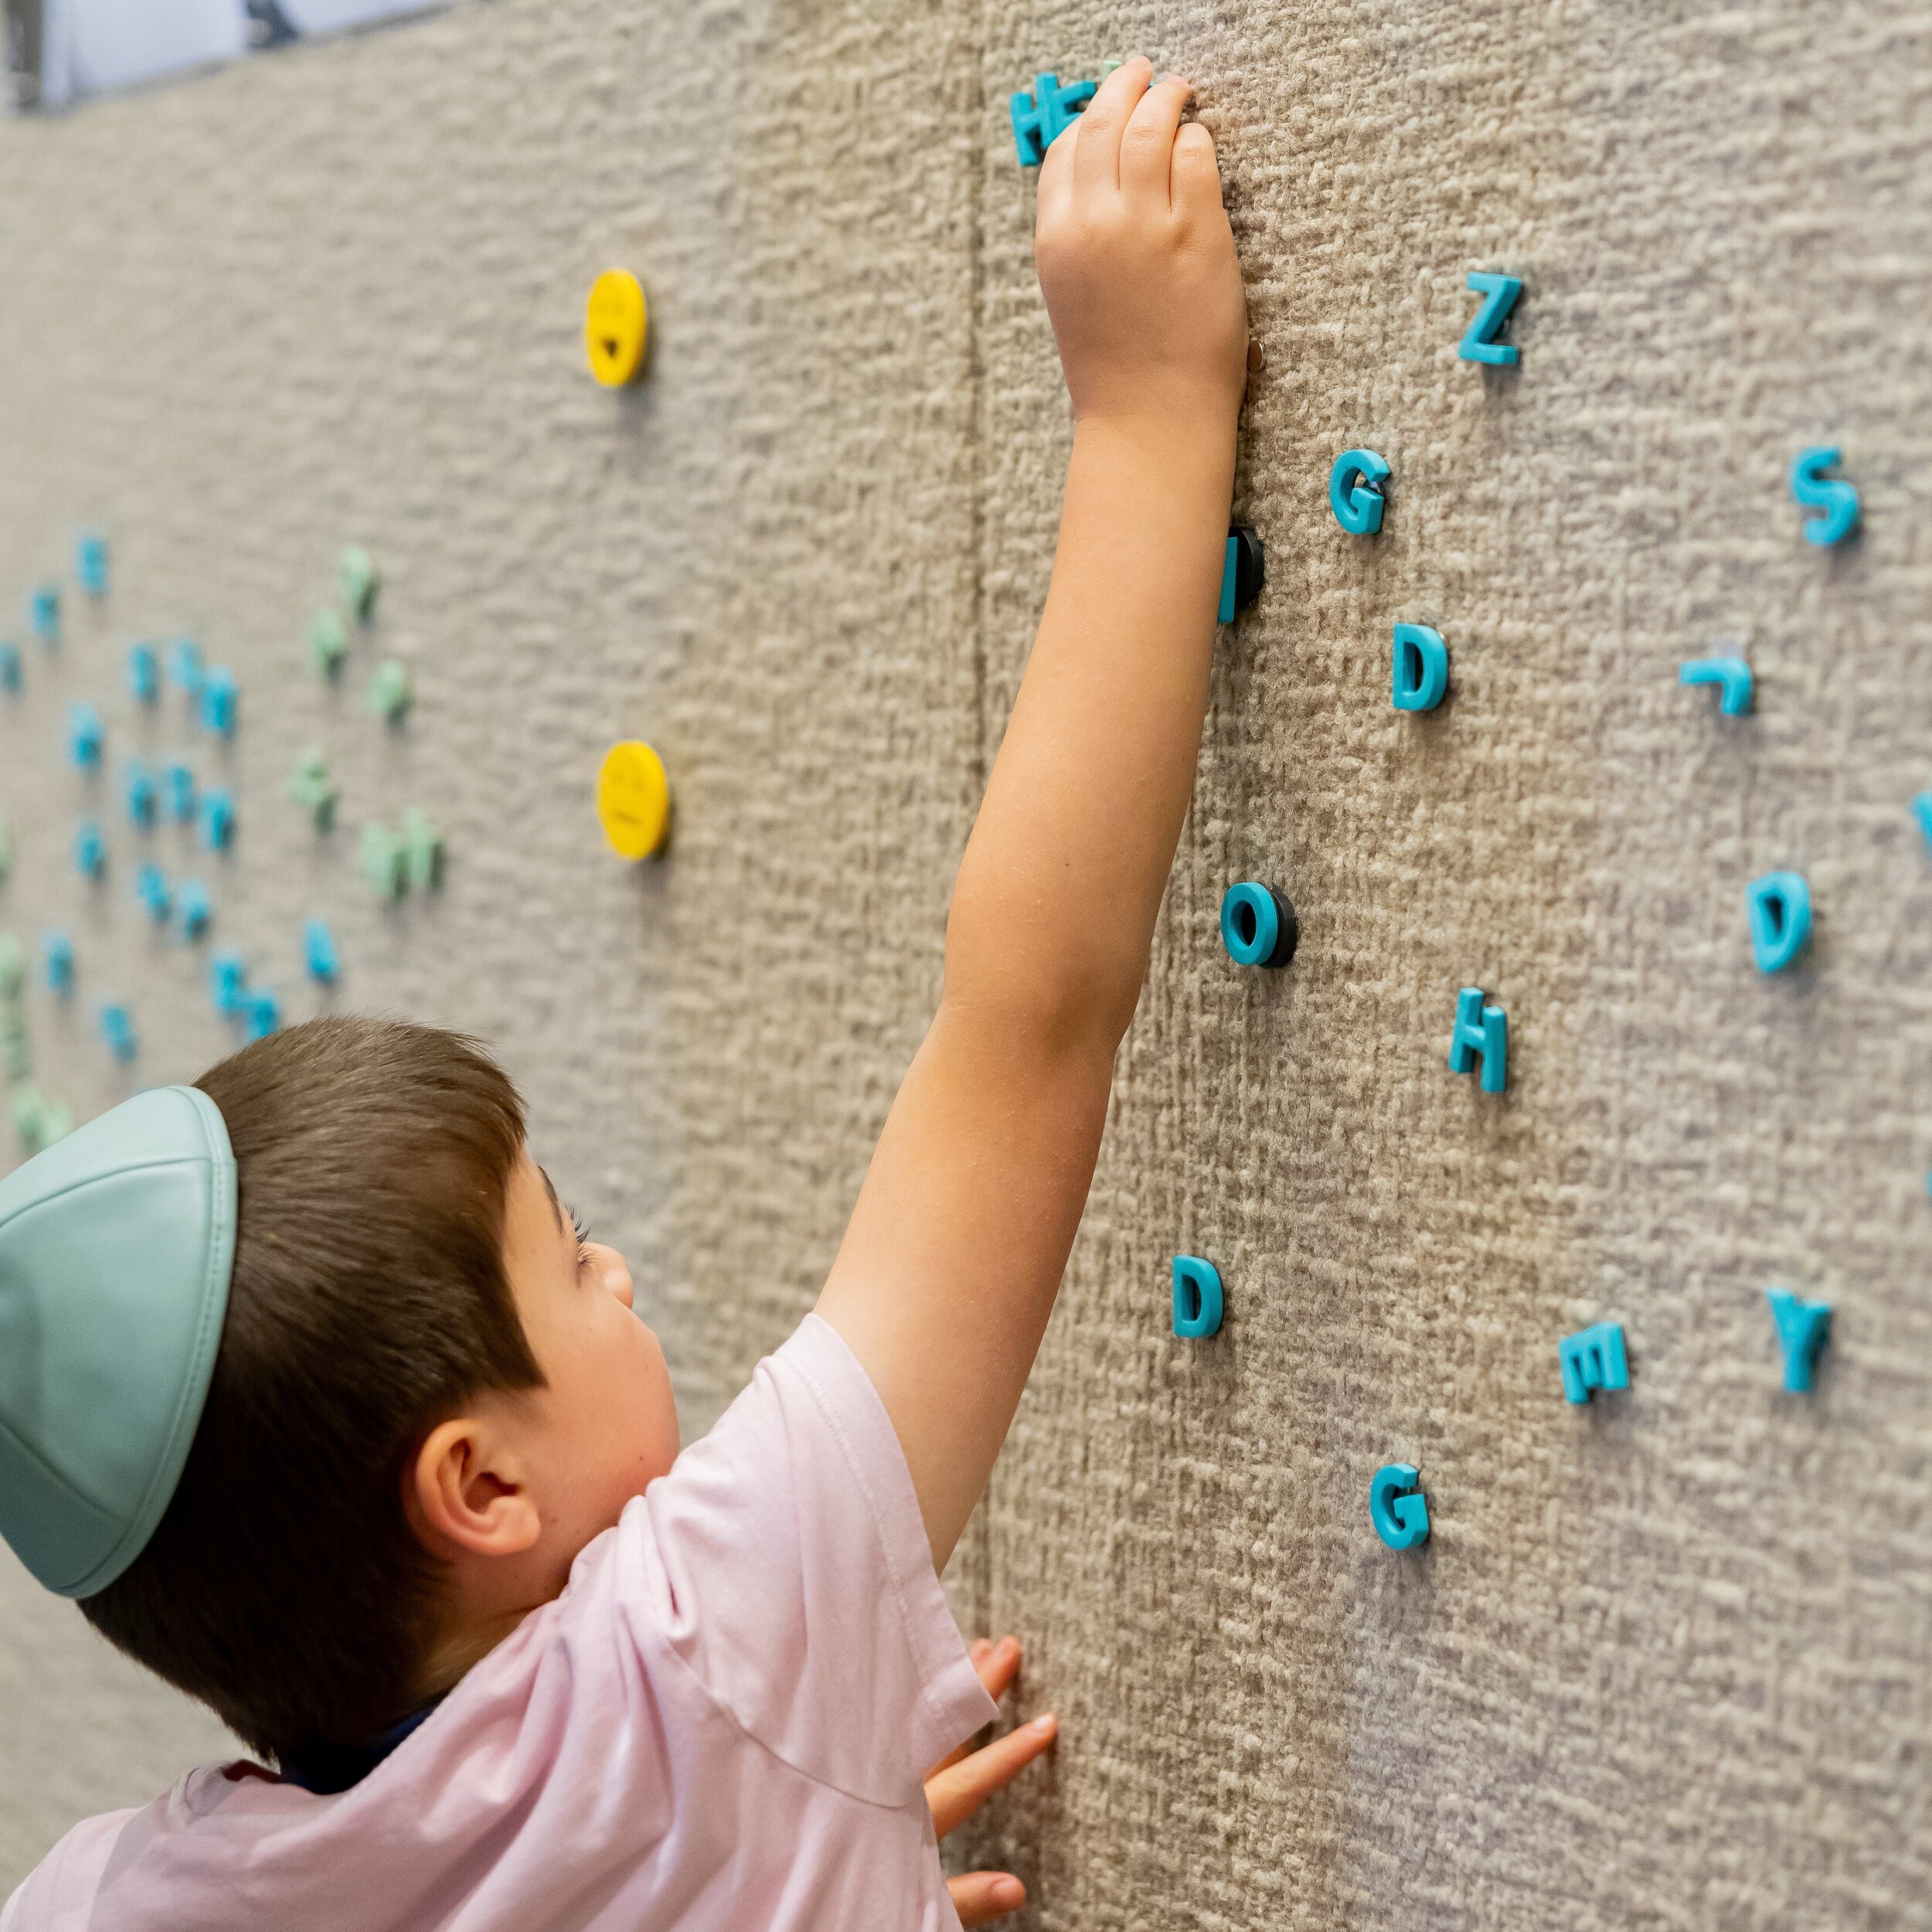 The magnet wall activity was just so fun! All guests, big and small, described some pictures provided with one word! #atxeventplanners #atxeventplanner #austineventplanner #atx #atxevents